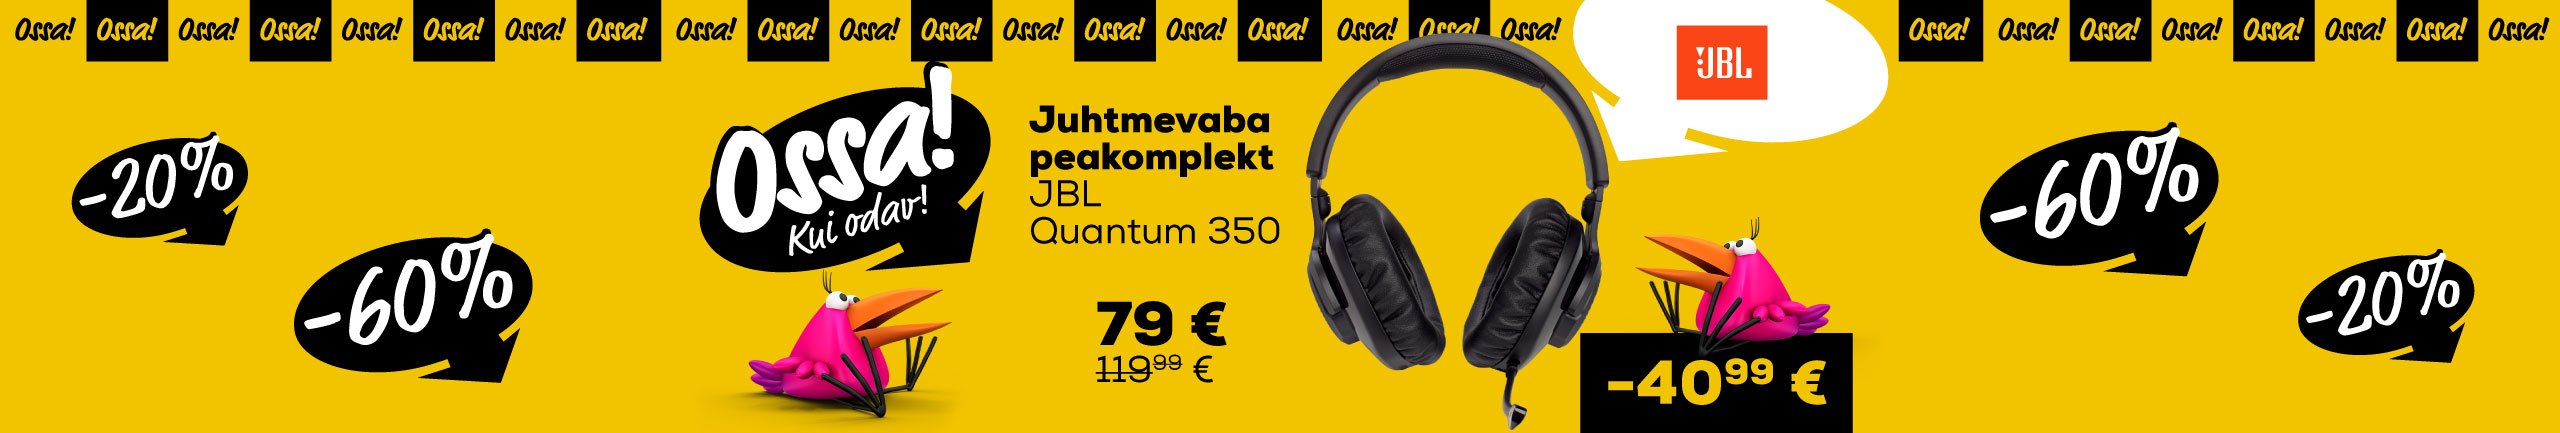 FPS Ossa extended! We added new products! Wireless Headset JBL Quantum 350 